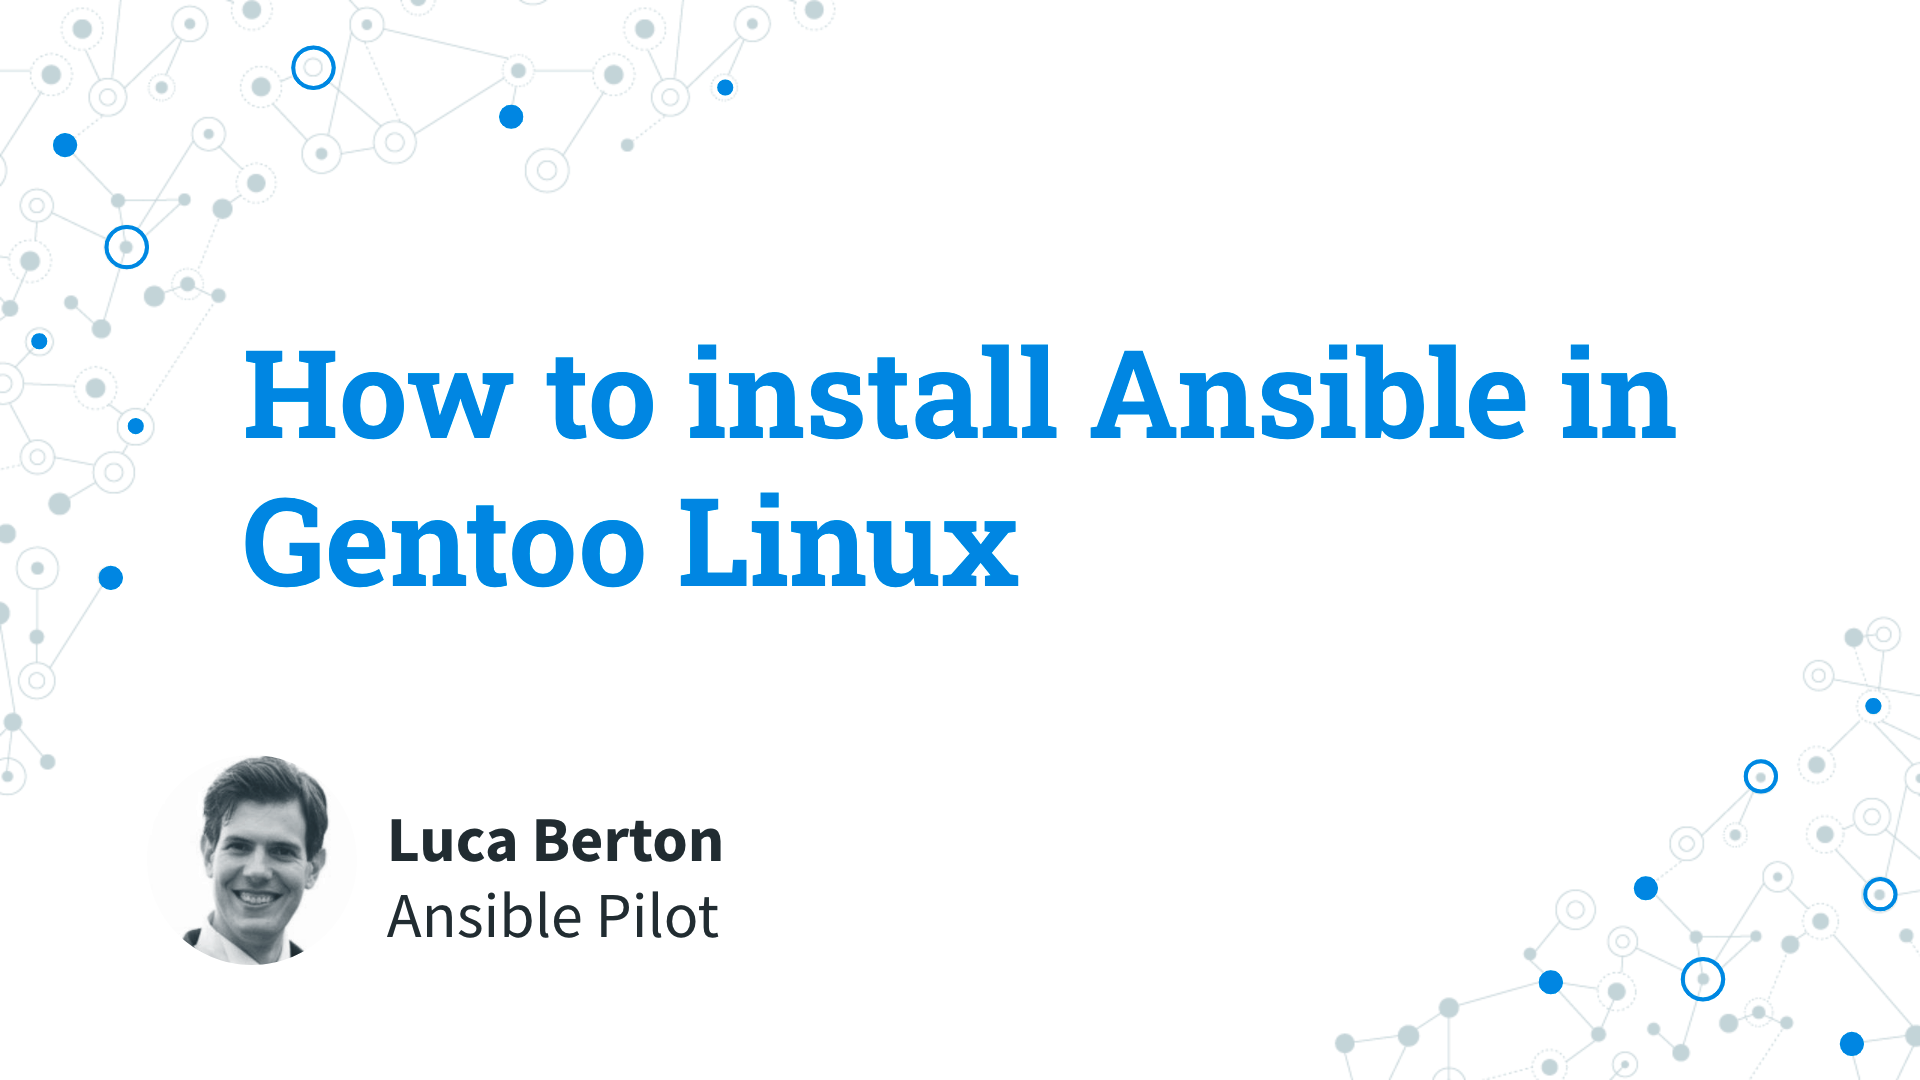 How to install Ansible in Gentoo Linux - Ansible install